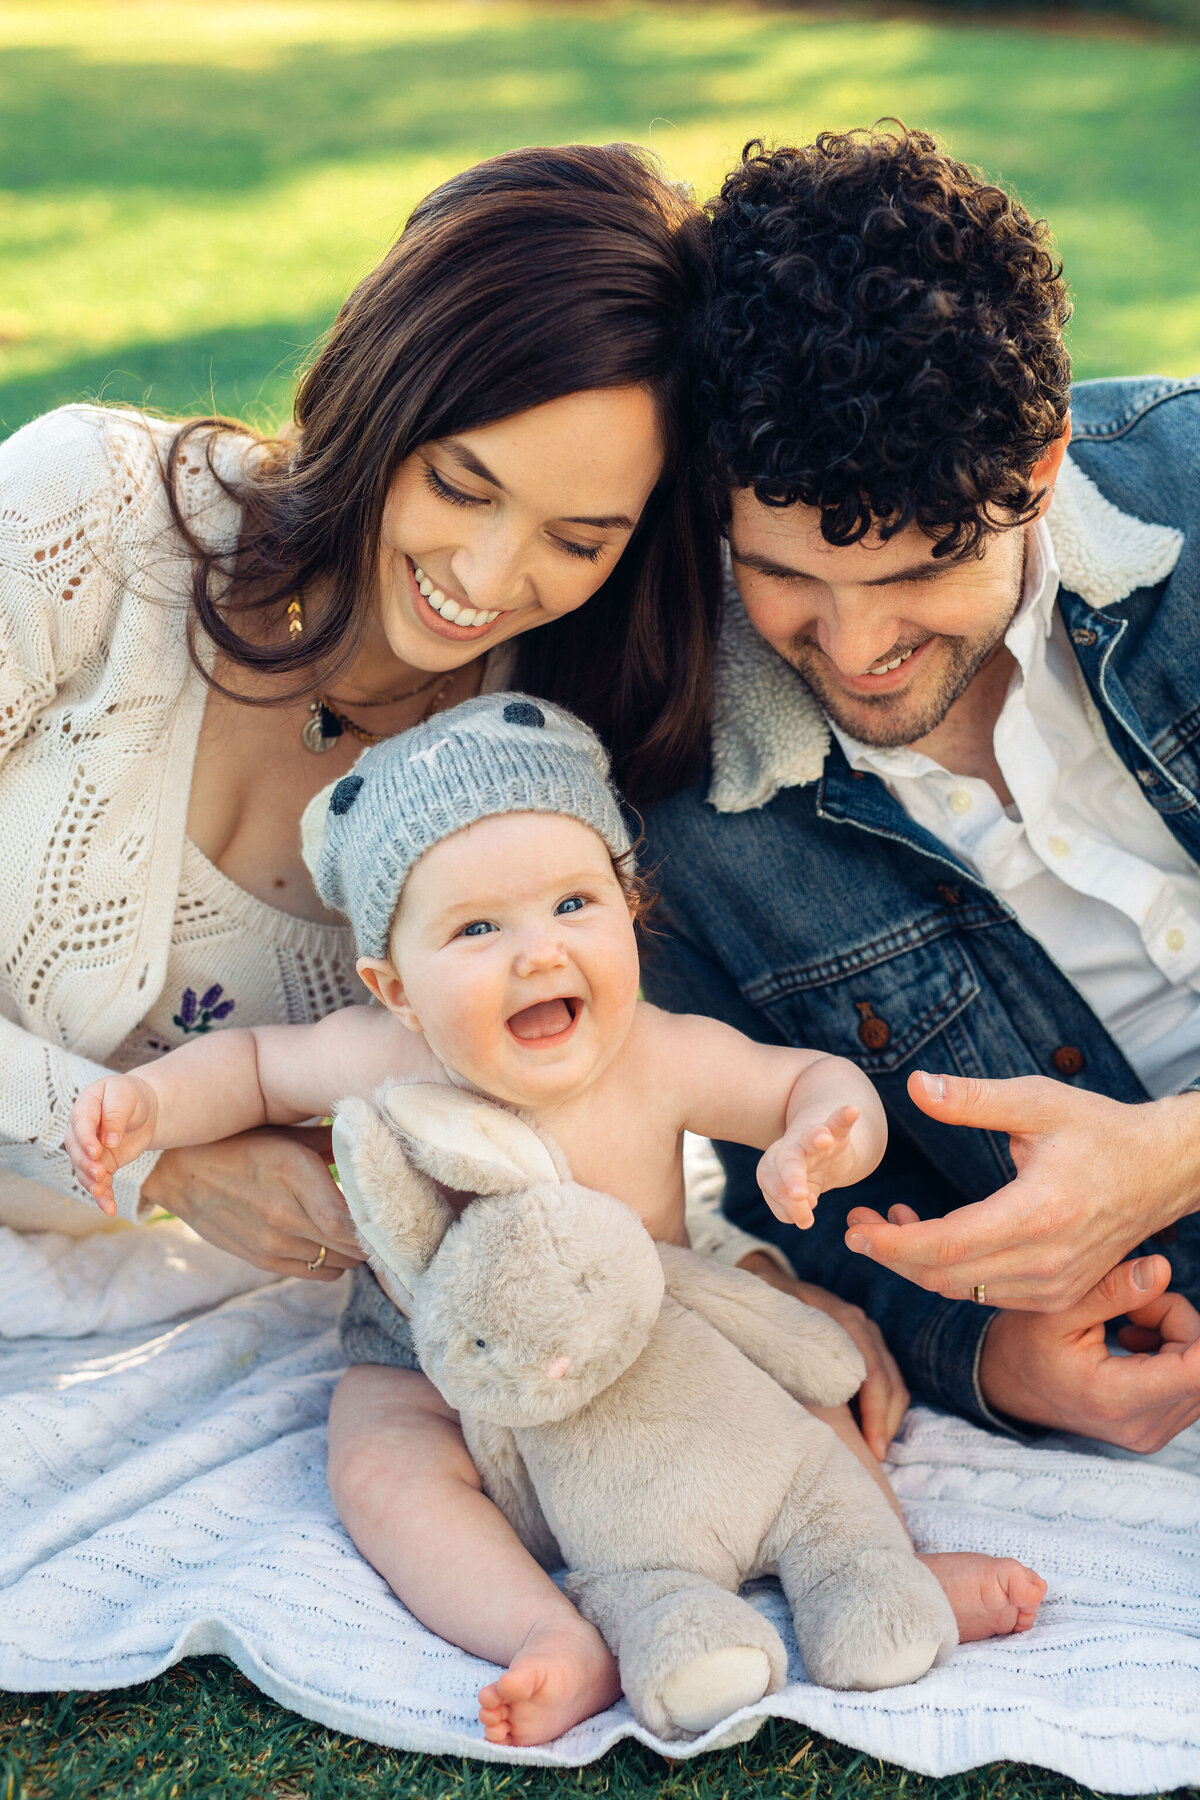 Family Portrait Photo Of Baby Laughing With The Parents  Whiles Sitting On The Ground In los Angeles